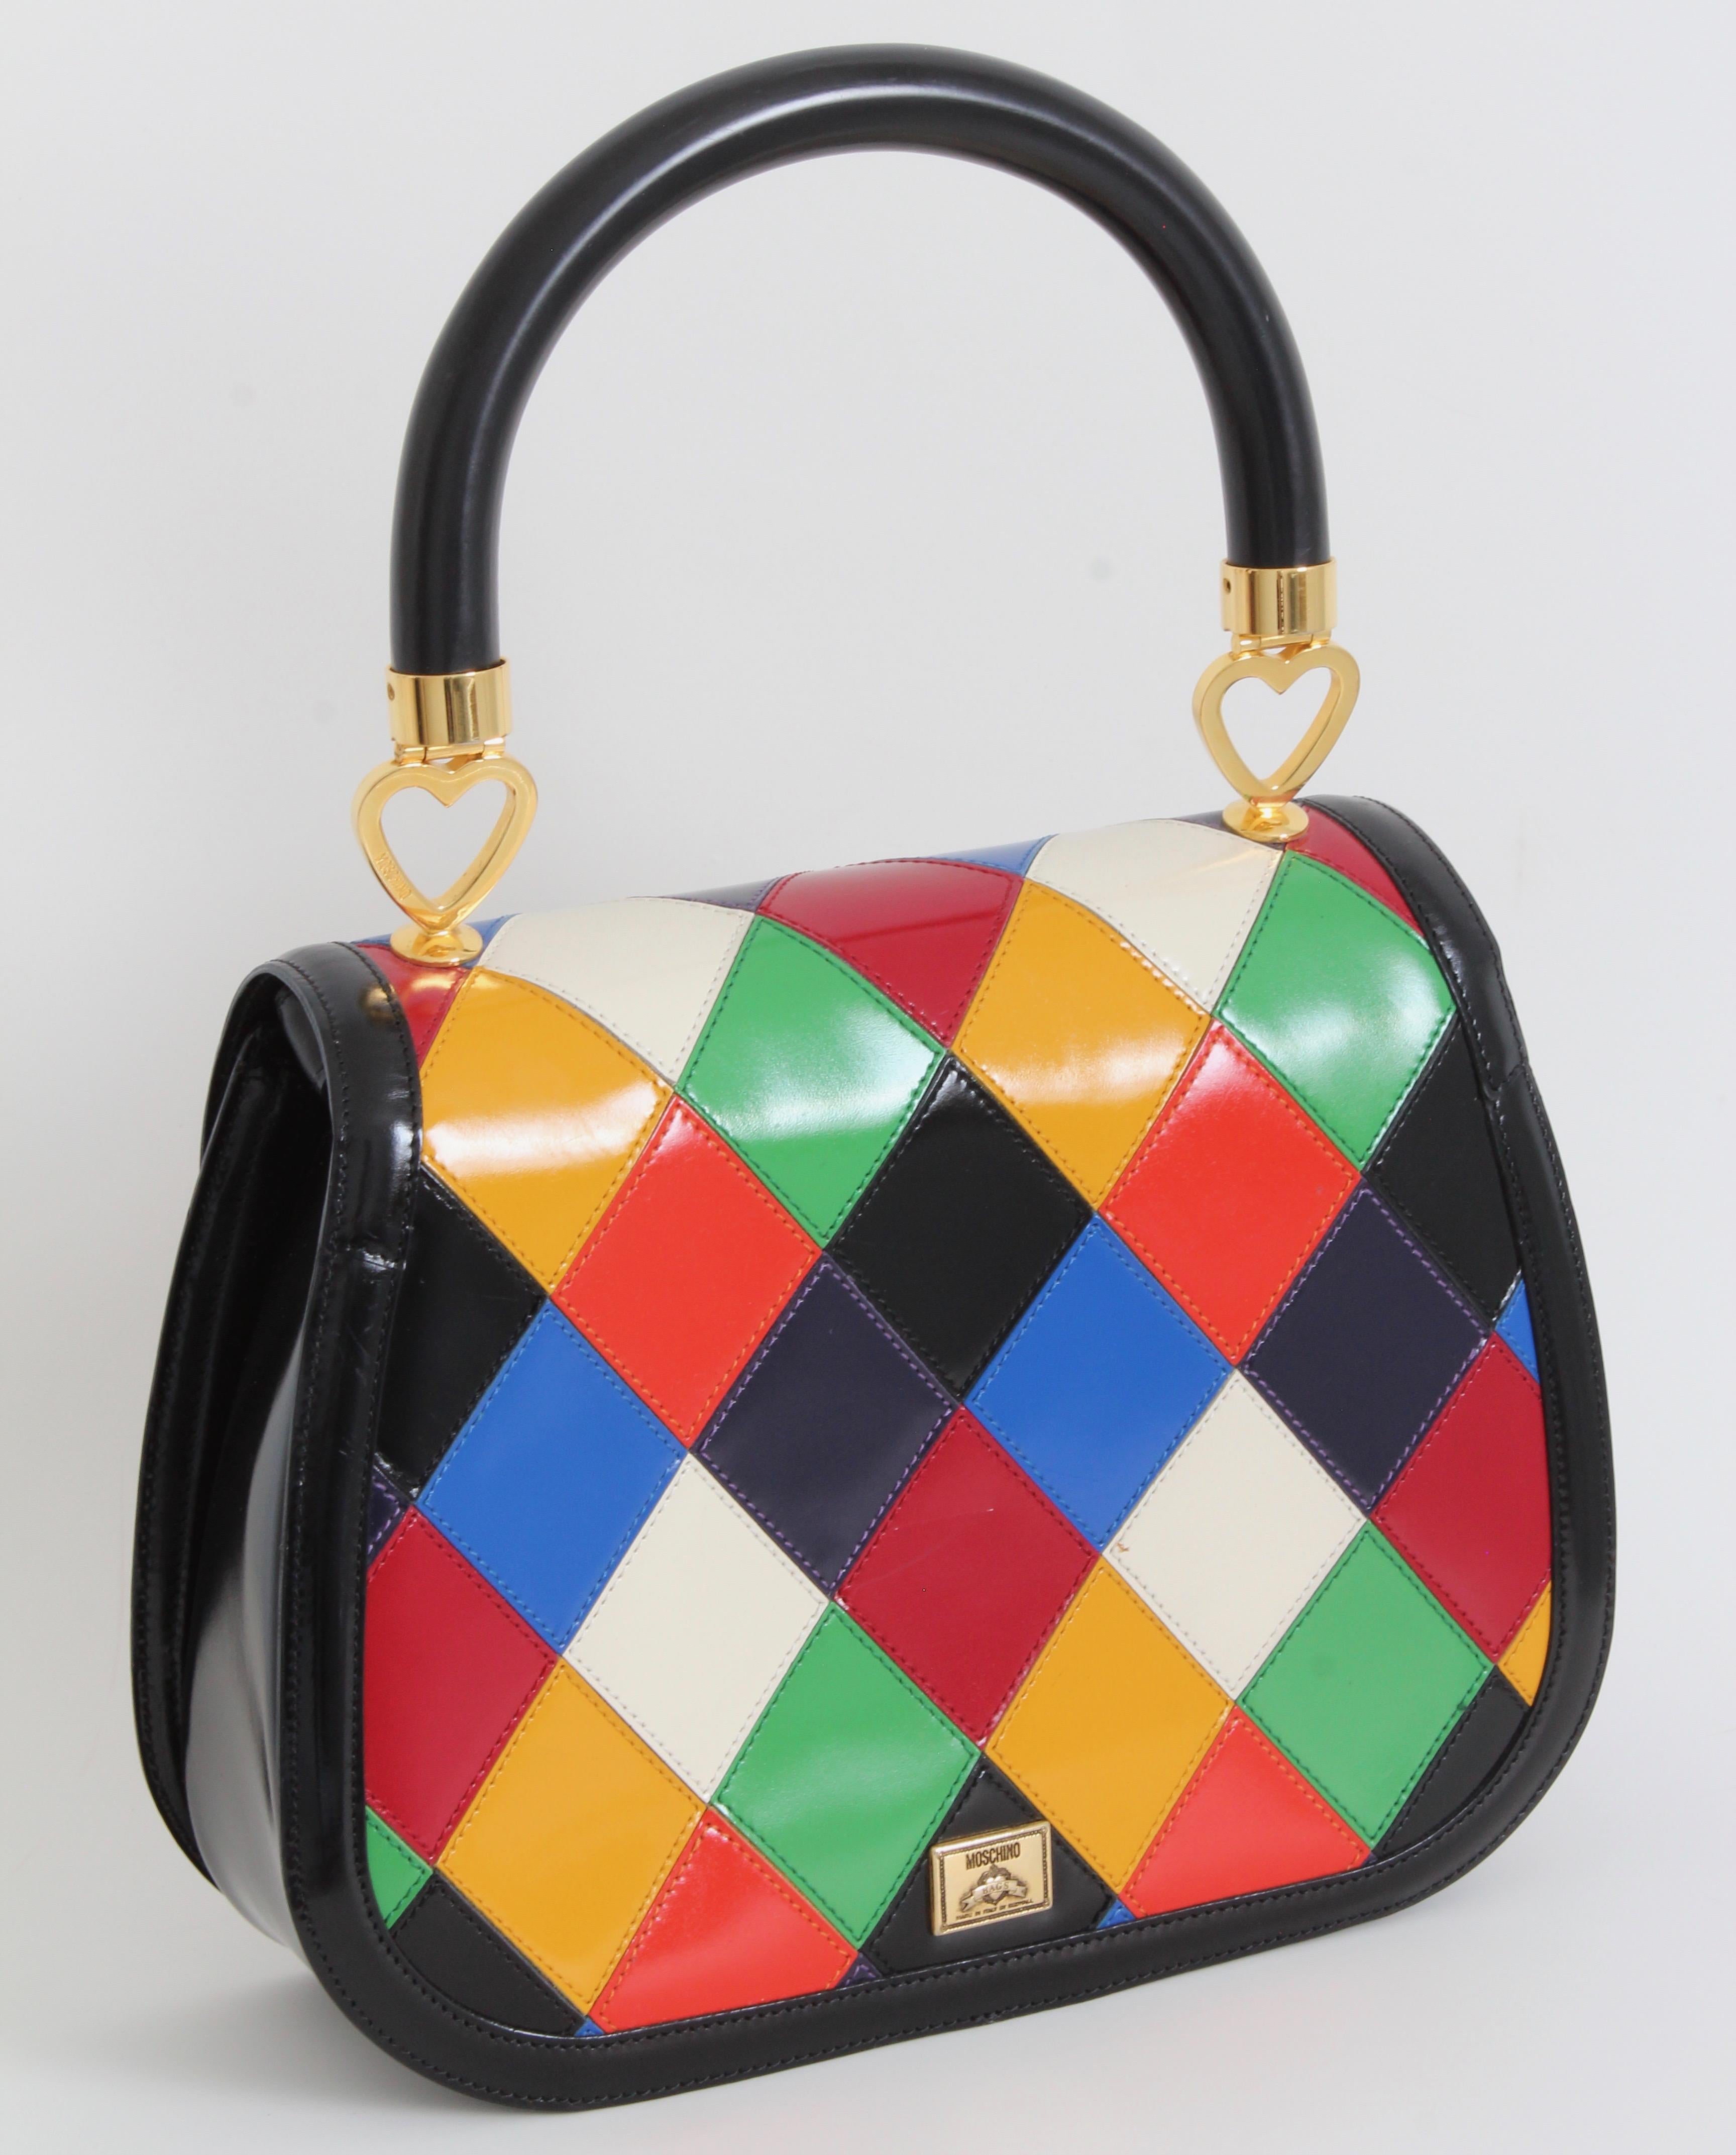 Women's Rare Moschino Leather Bag Harlequin Patch Top Handle with Shoulder Strap Italy